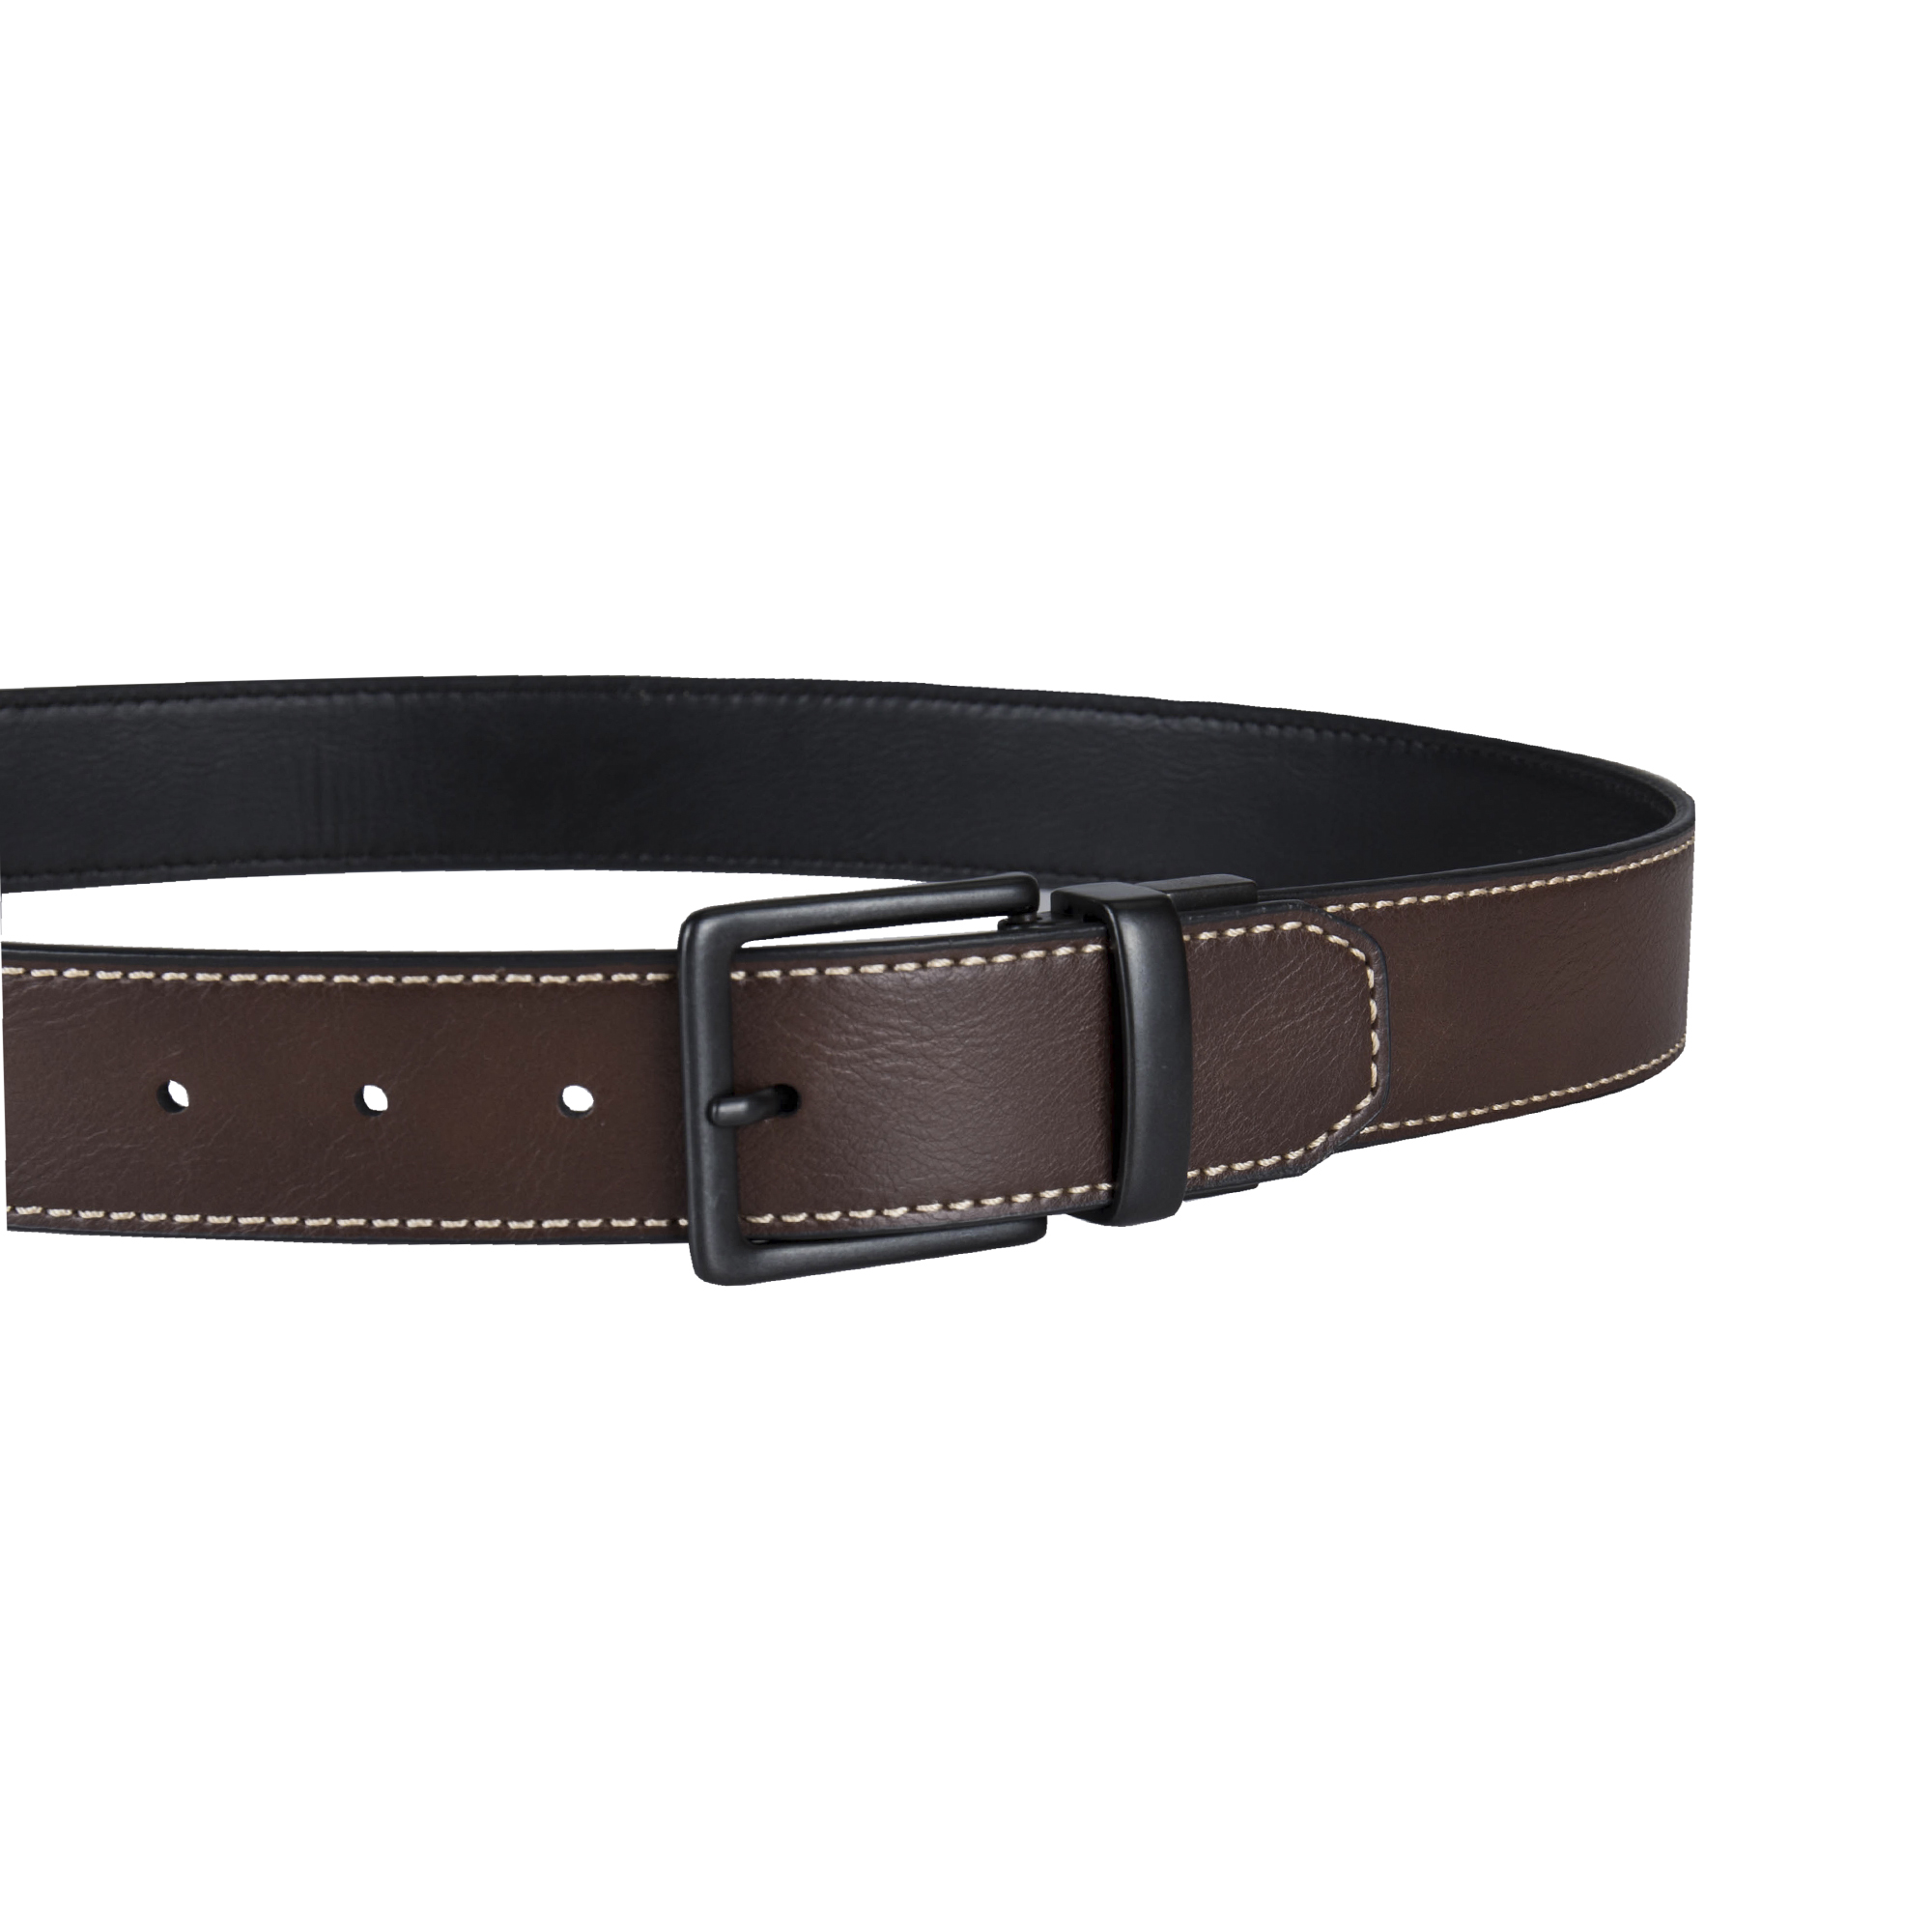 Levi's Men's Two-in-One Reversible Casual Jean Belt - image 3 of 7